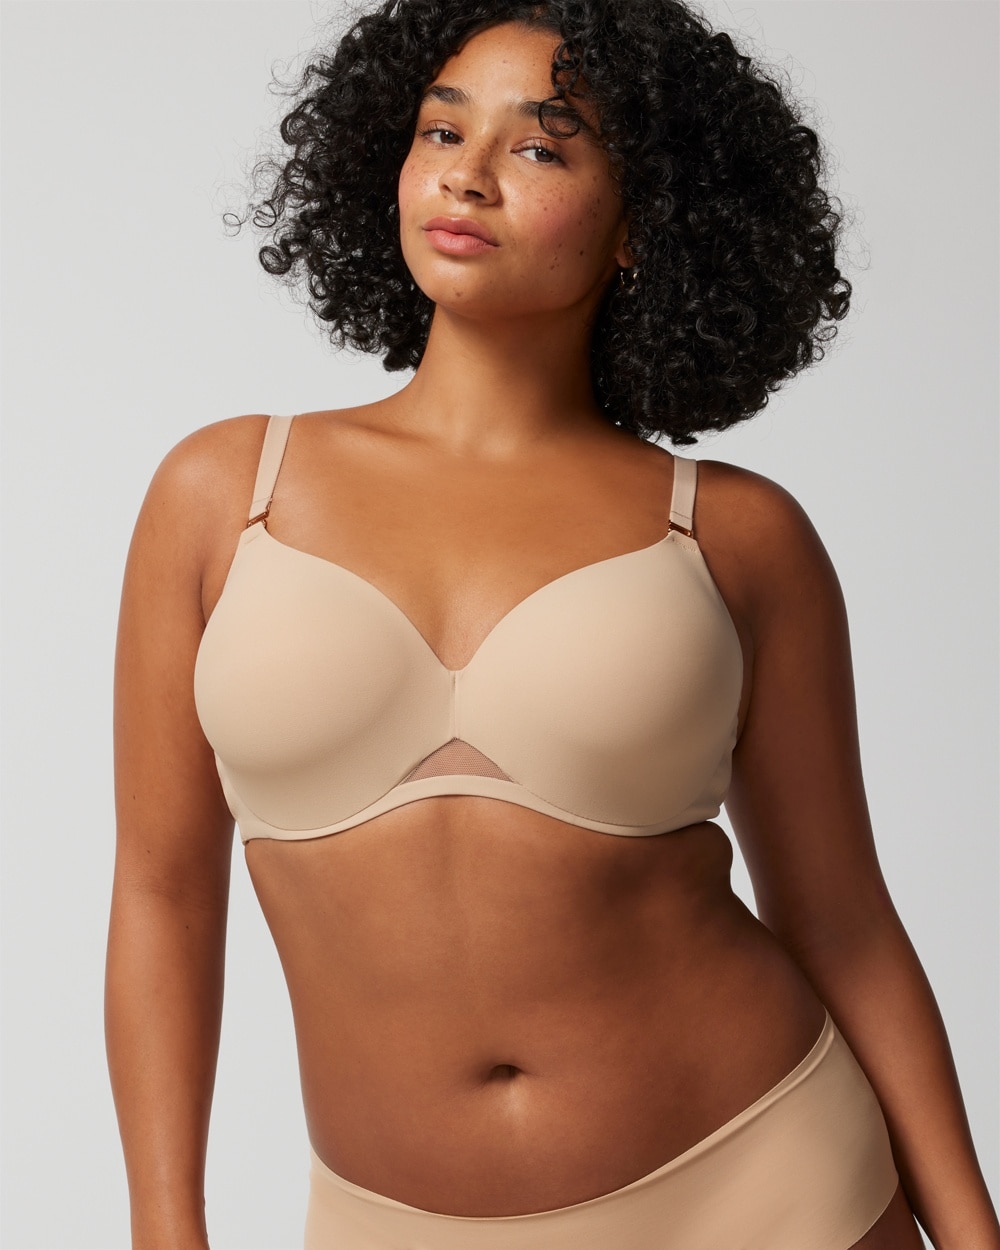 My Mom's Restocking Her Go-To Comfy T-Shirt Bra While It's $18 at